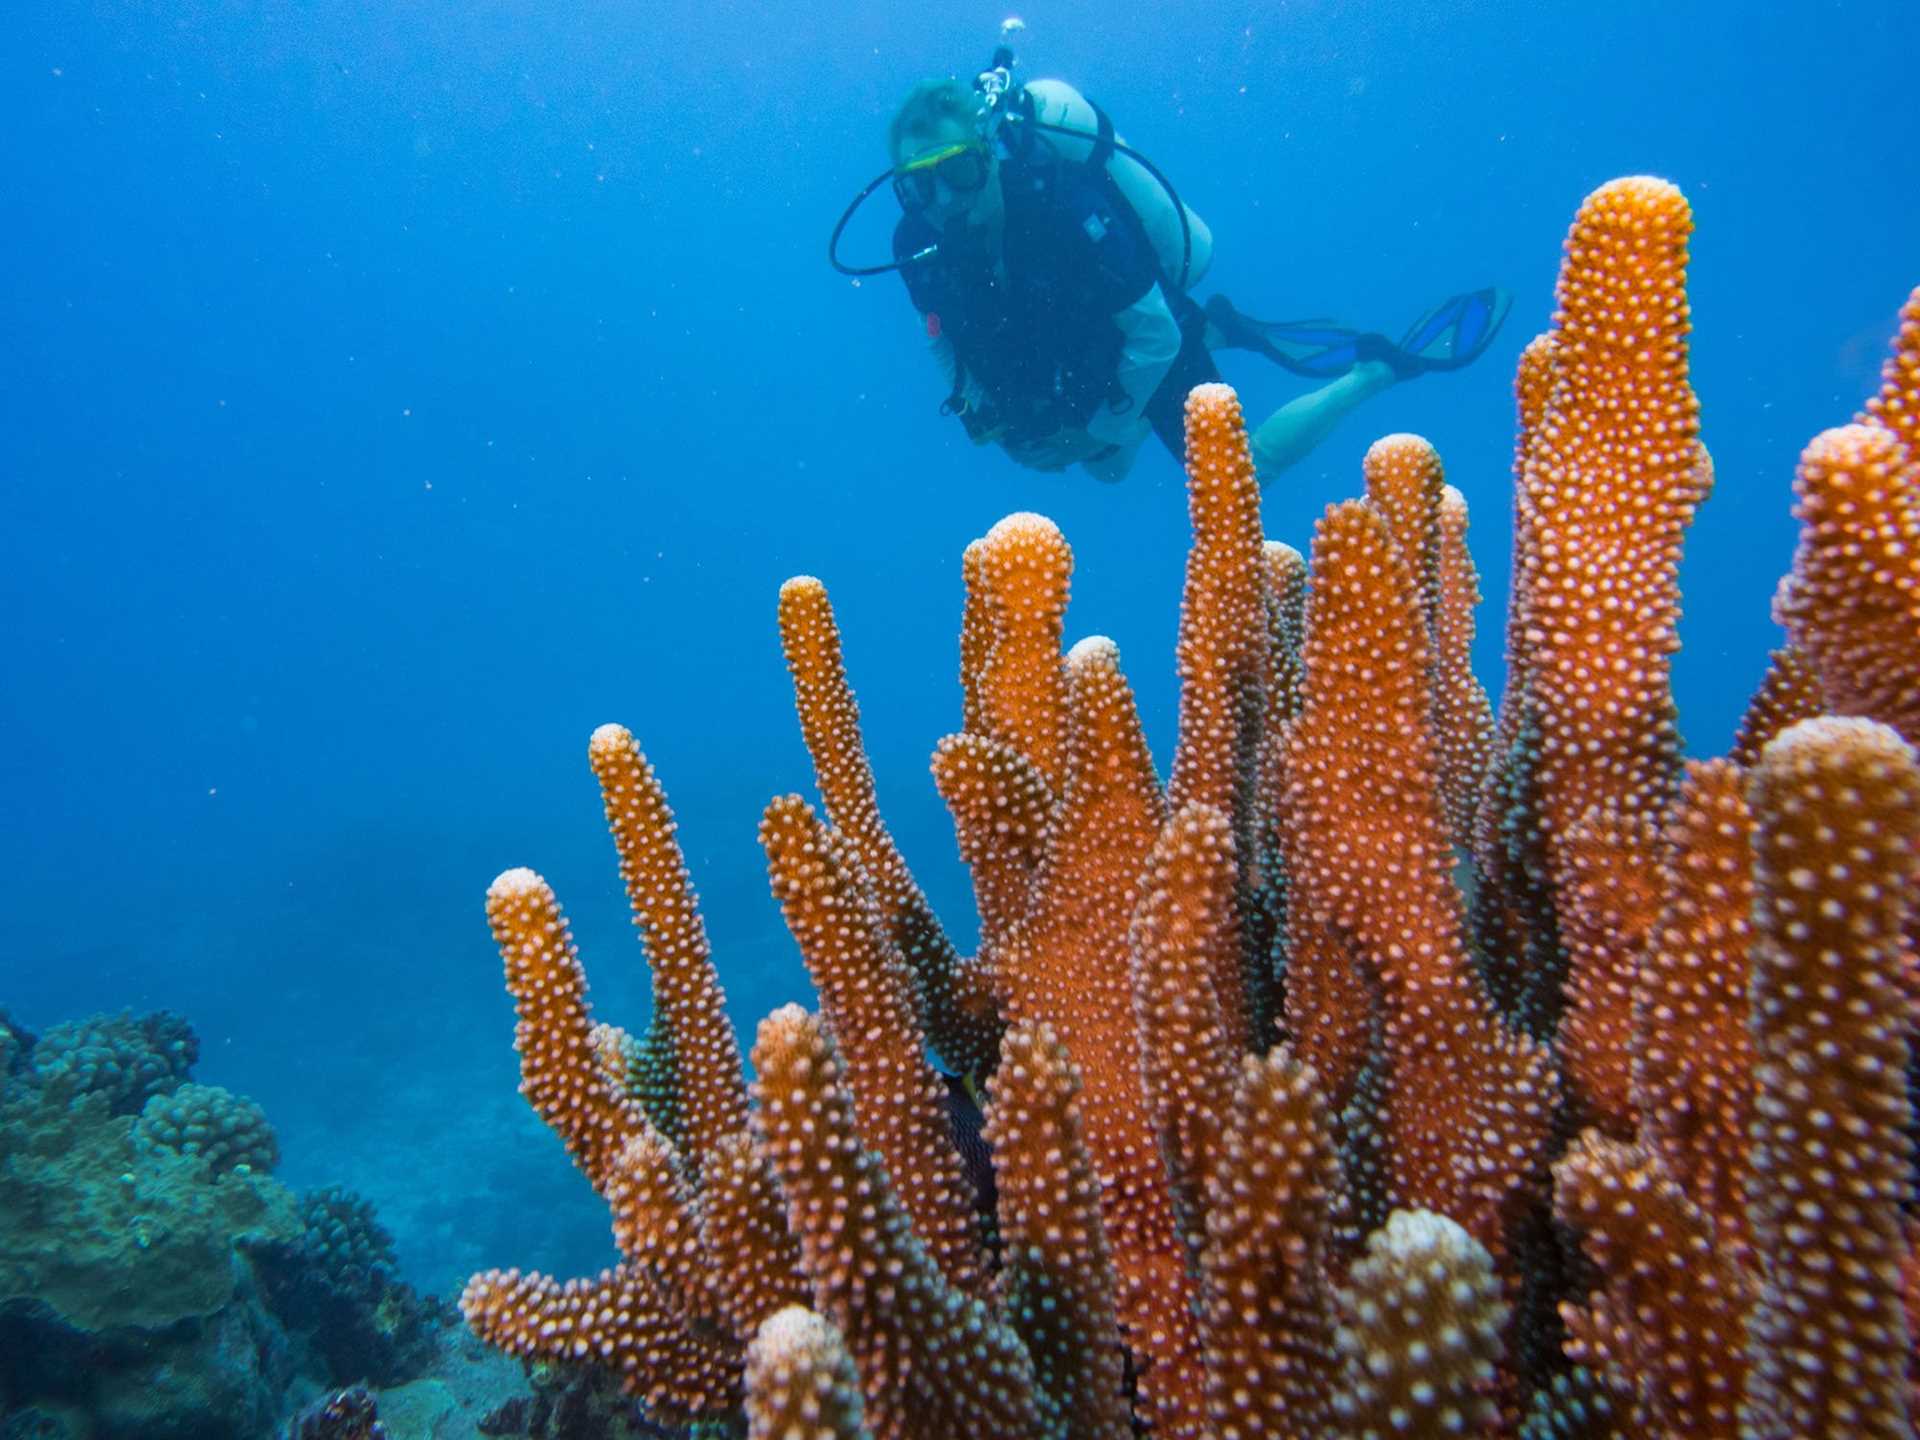 diver among red coral